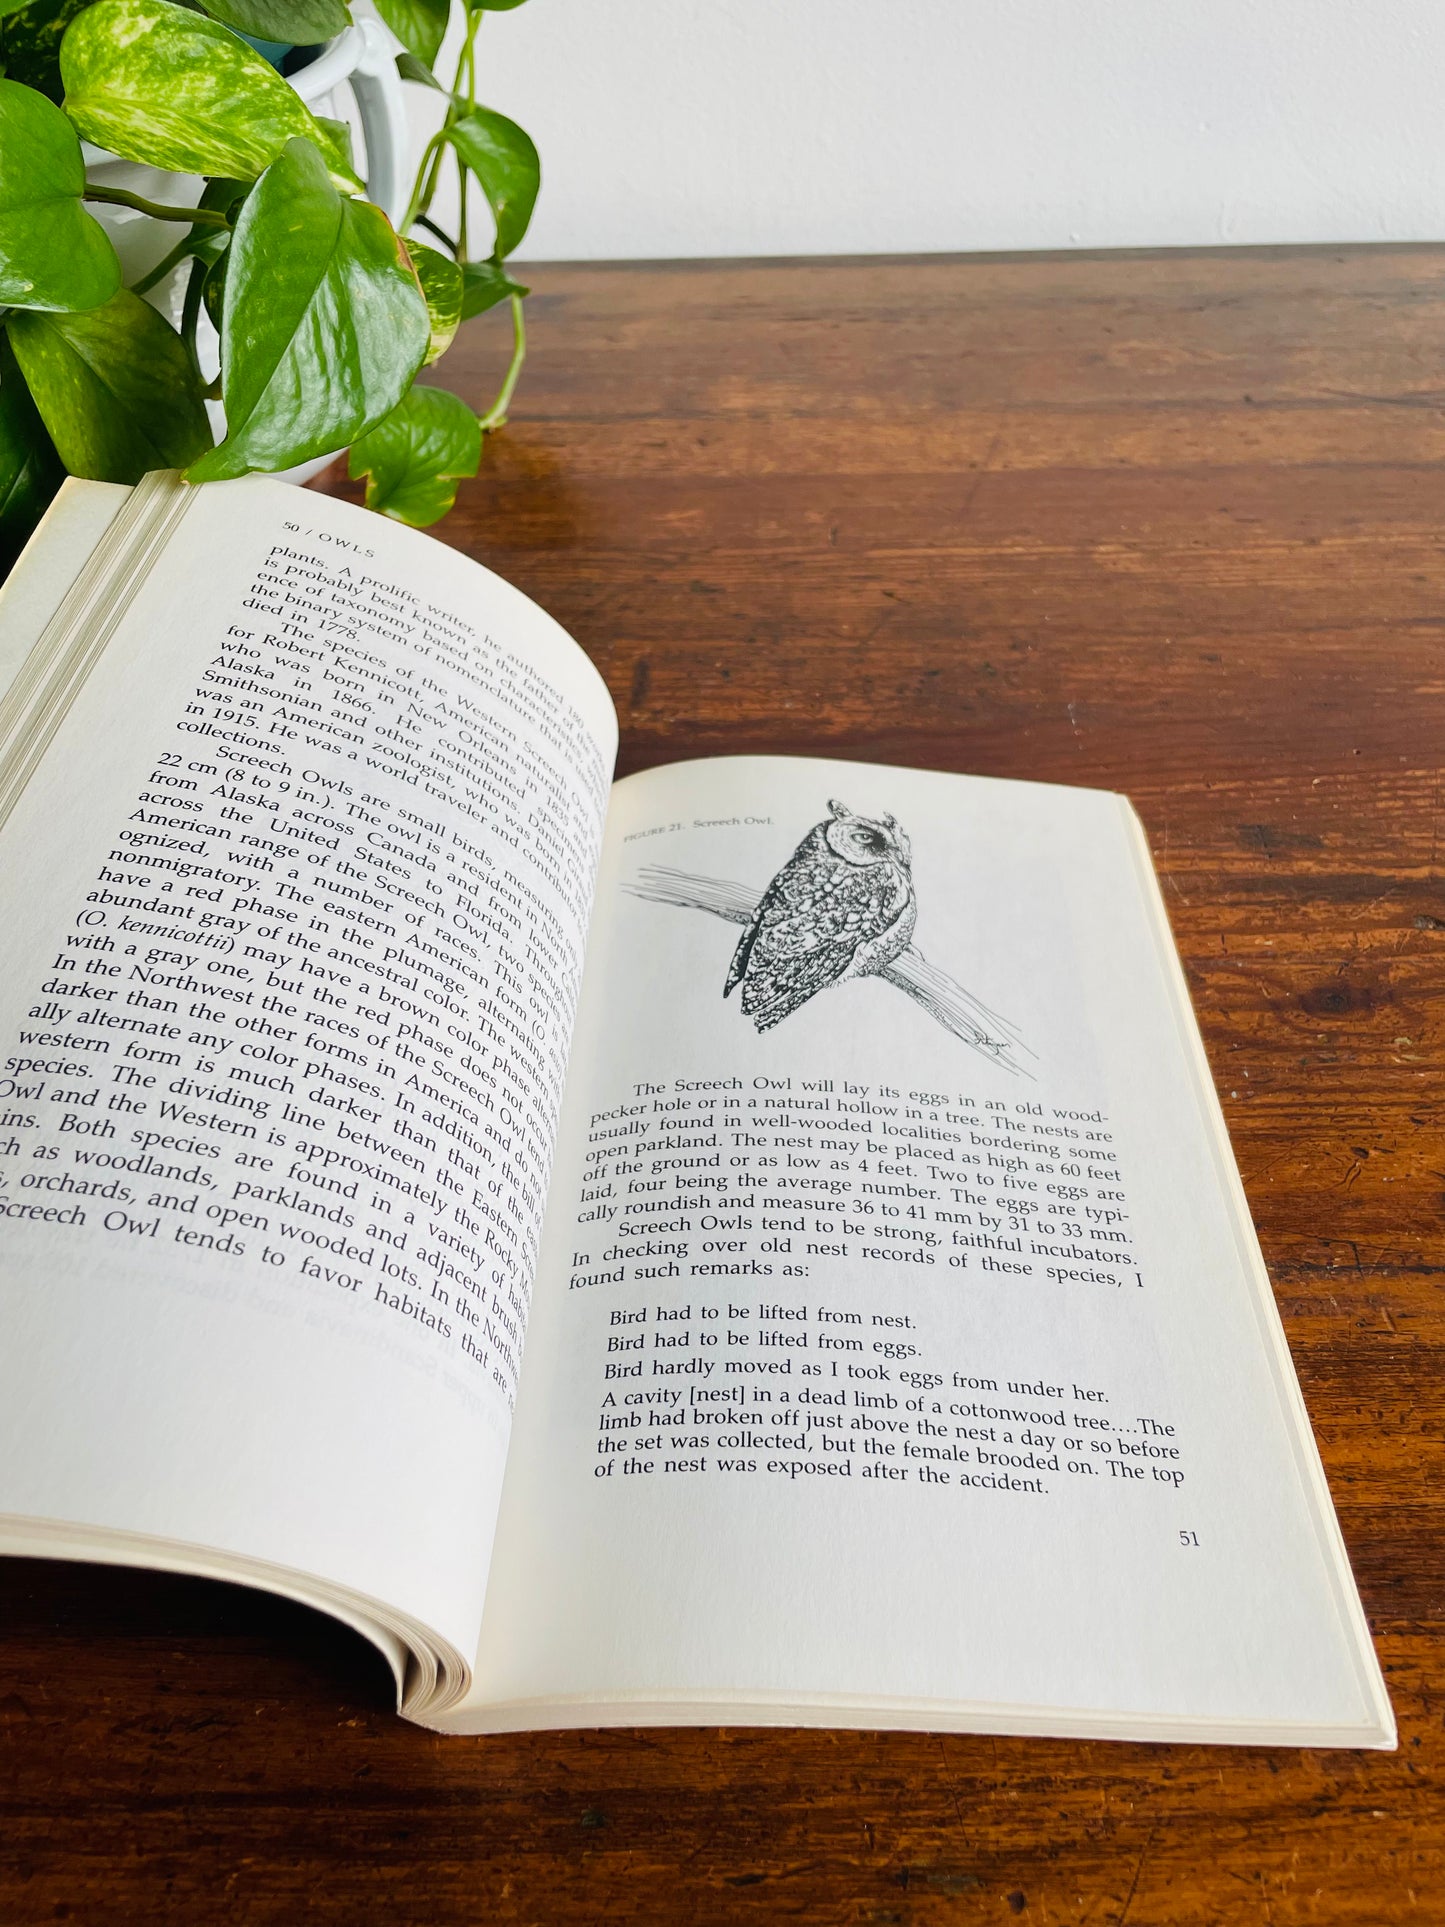 Owls: An Introduction for the Amateur Naturalist Book by Gordon Dee Alcorn (1986)